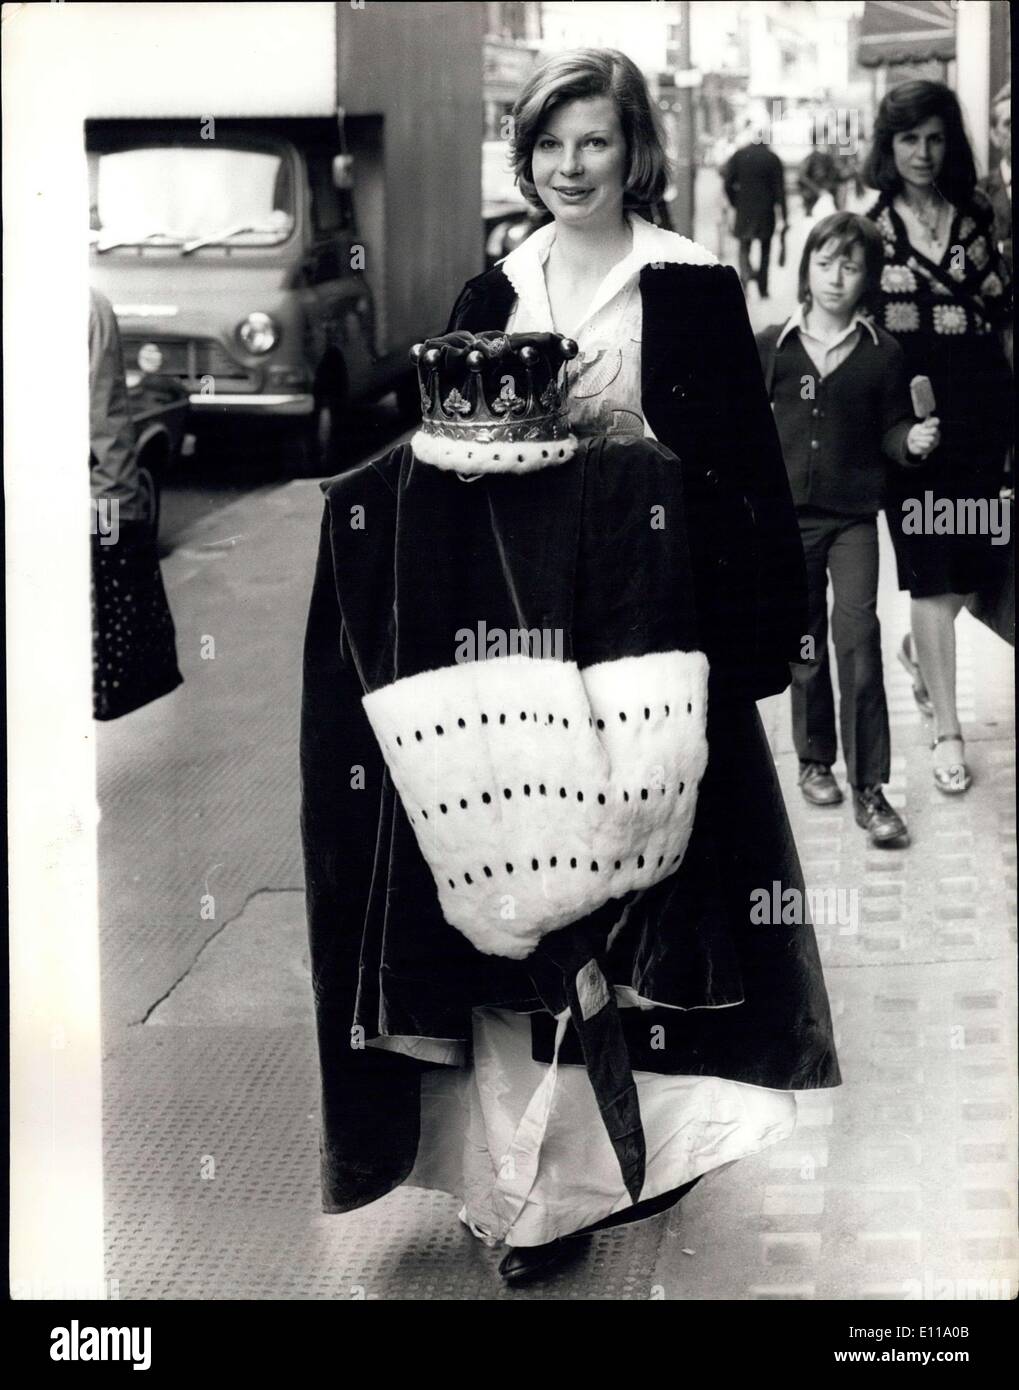 May 28, 1976 - Lord Lucan's Coronet and Coronation Robe Sold by Auction in London for 20. The Earl of Lucan's coronet and crimson and ermine robe, a family heir loom, suffered the ultimate indignity yesterday, when as lot 188, they were sold to a New Bond Street antique dealer for 20 at Christi's auction rooms, South Kensington, London. The proceeds of the sale will go towards settling Lord Lucan's debts reckoned at $ 70,000. He vanished 18 months ago after the murder of Mrs. Sandra Rivett, his children's nanny. There is a warrant out for his arrest in connection with her death Stock Photo